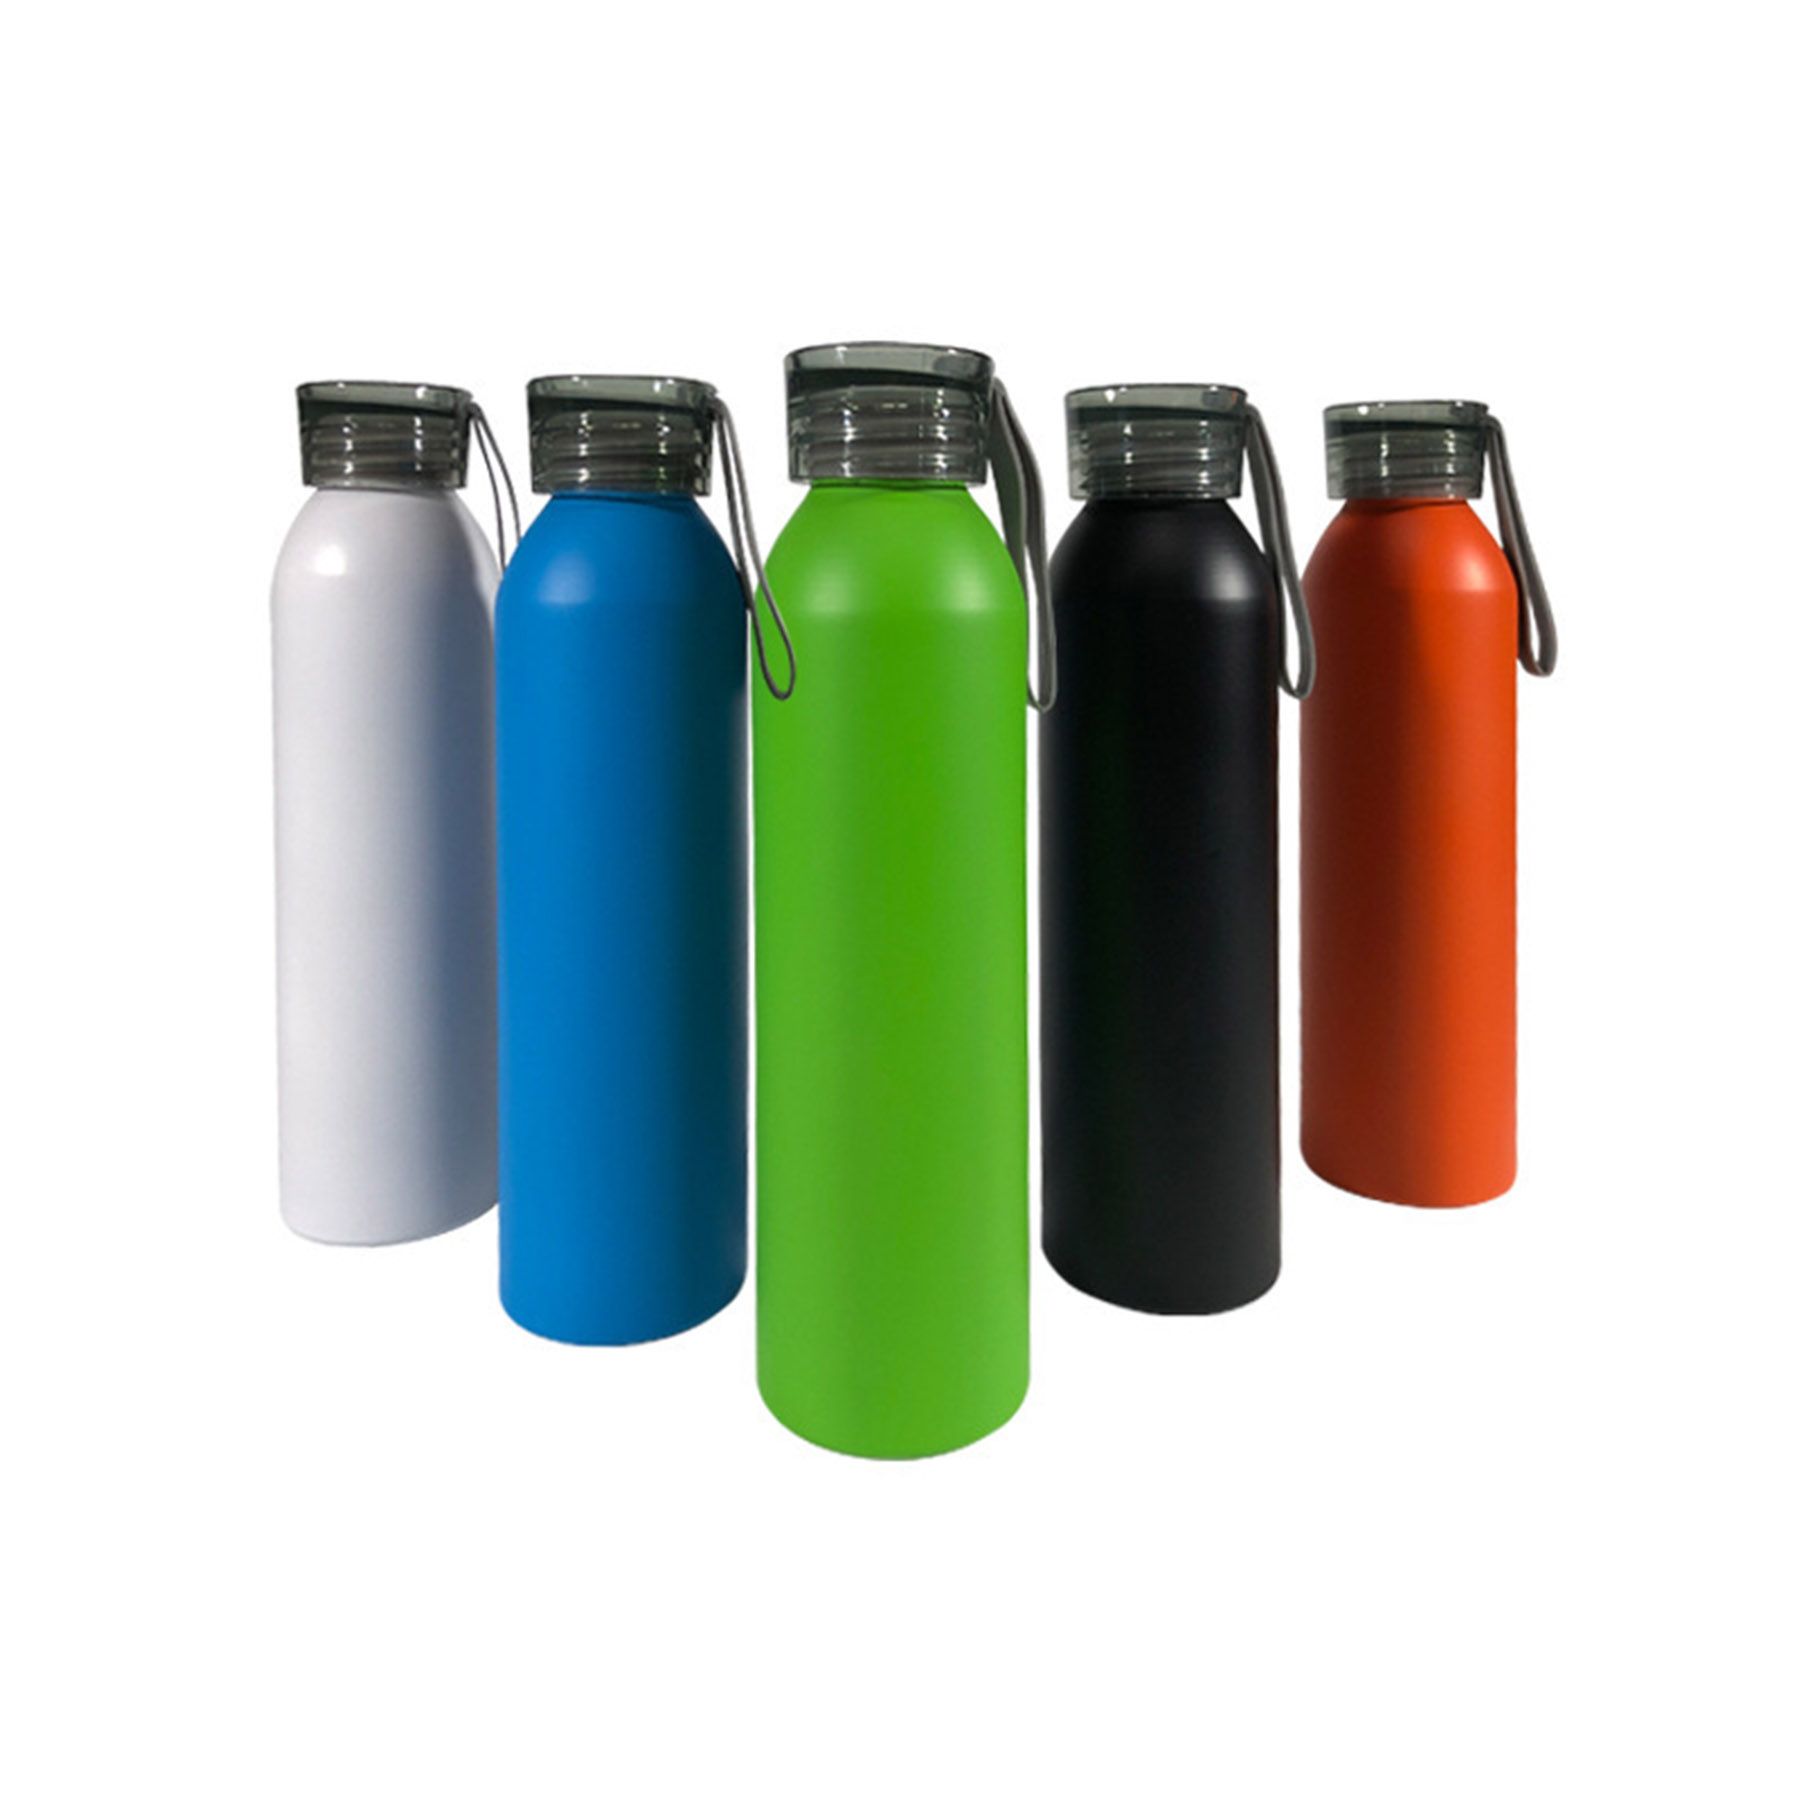 The Sleek 22 oz. Aluminum Water Bottle with Silicone Strap - Screenprinted